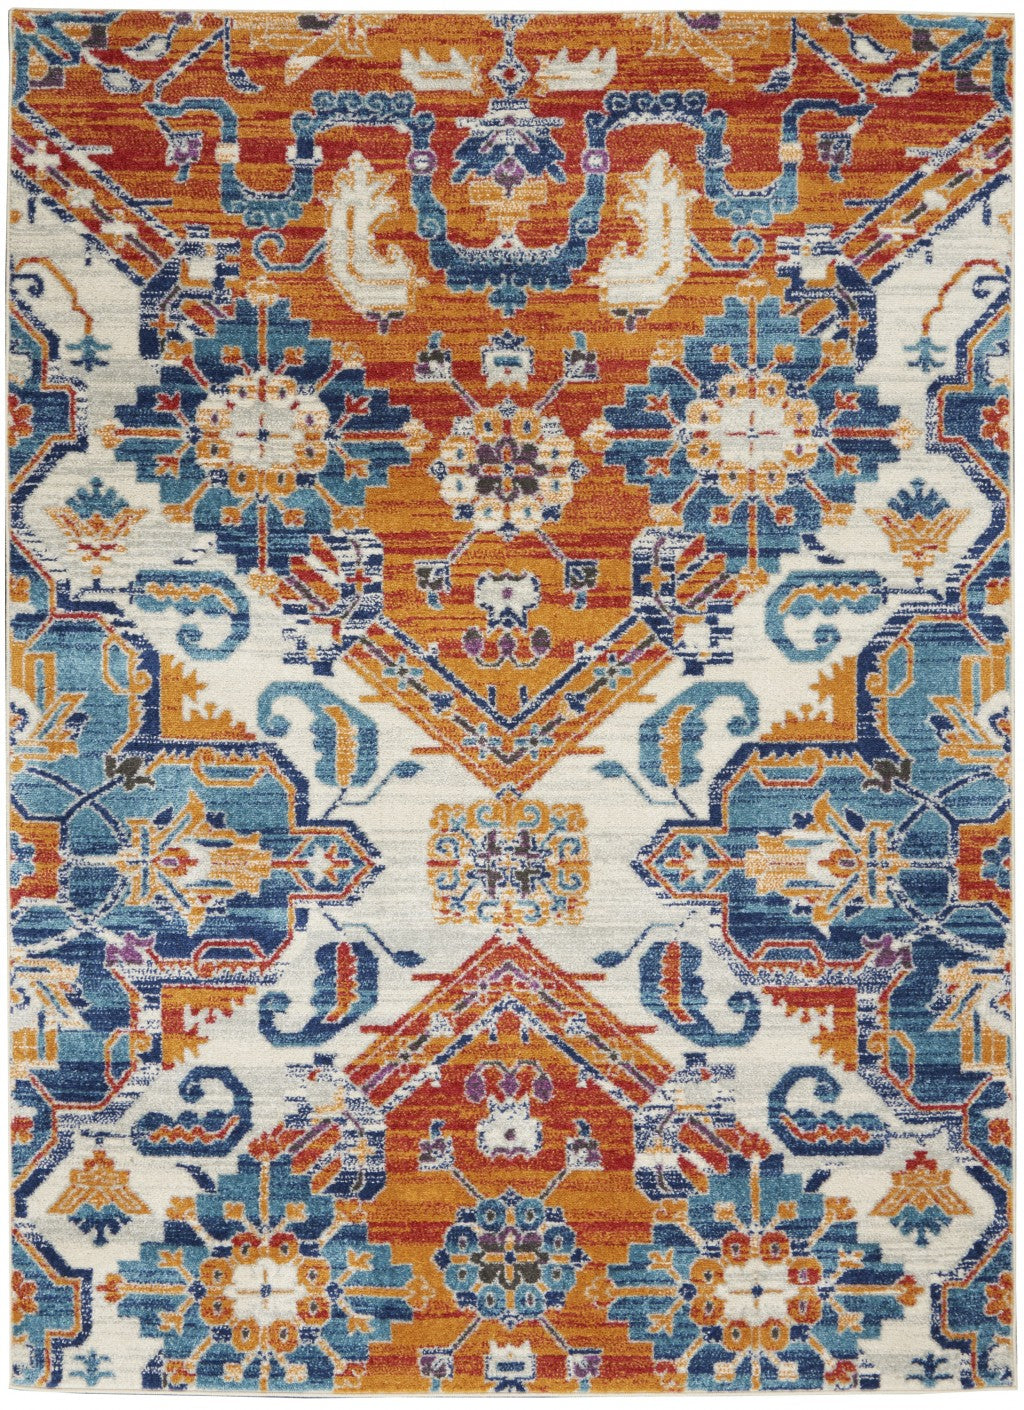 5' X 7' Orange And Ivory Floral Power Loom Area Rug